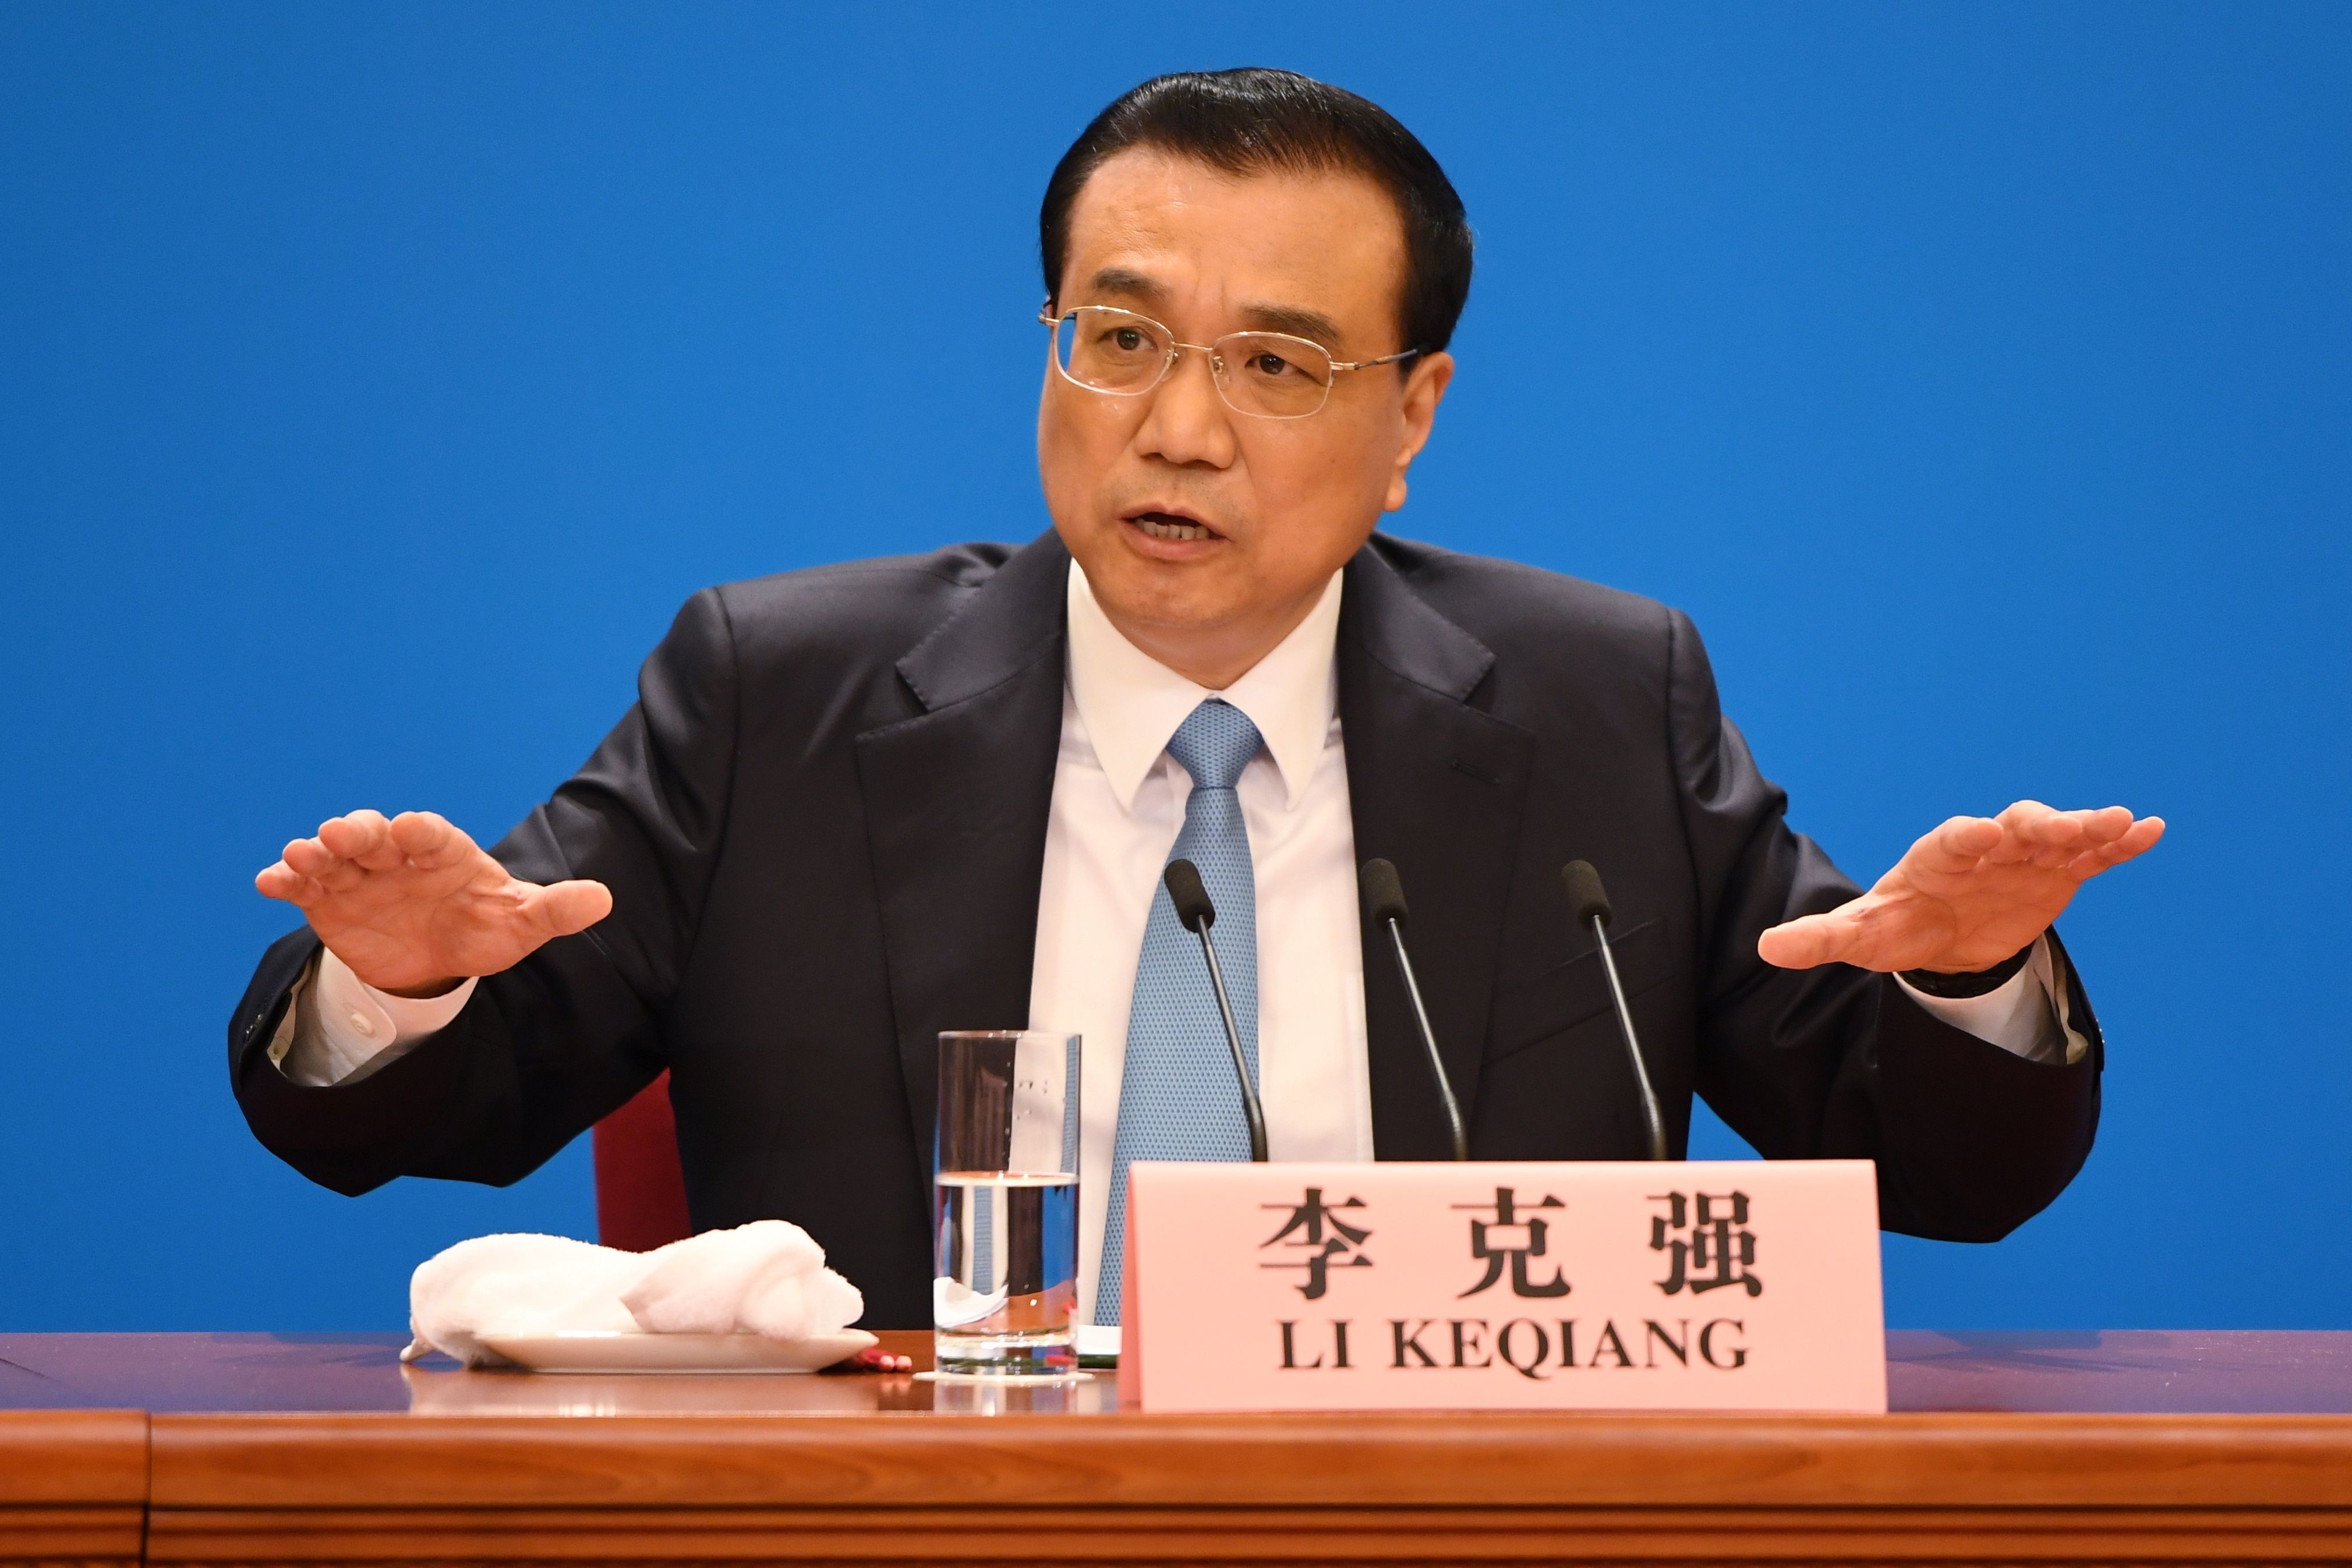 Chinese Premier Li Keqiang said that the assistance China provided to underdeveloped nations came “without any political conditions”. Photo: AFP